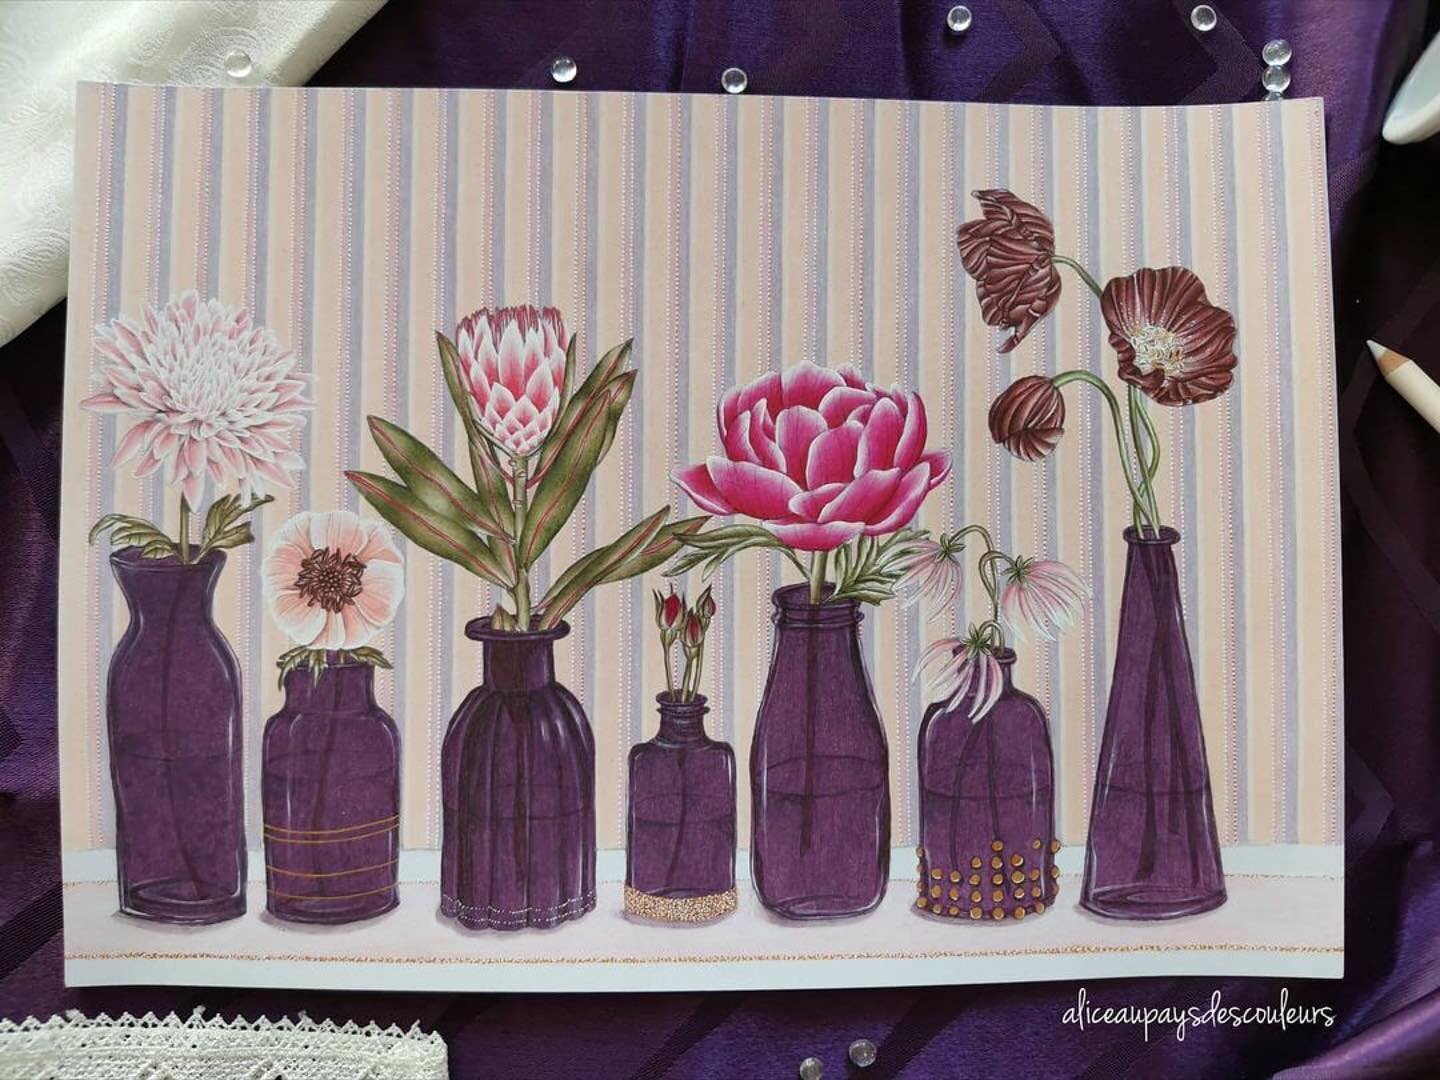 Absolutely love this coloring by the lovely @aliceaupaysdescouleurs 🌸 The wallpaper, the flowers, those purple vases!! Amazing!! 
.
It&rsquo;s been so wonderful to see how differently everyone has colored Garden Party.  I am truly amazed by all of t